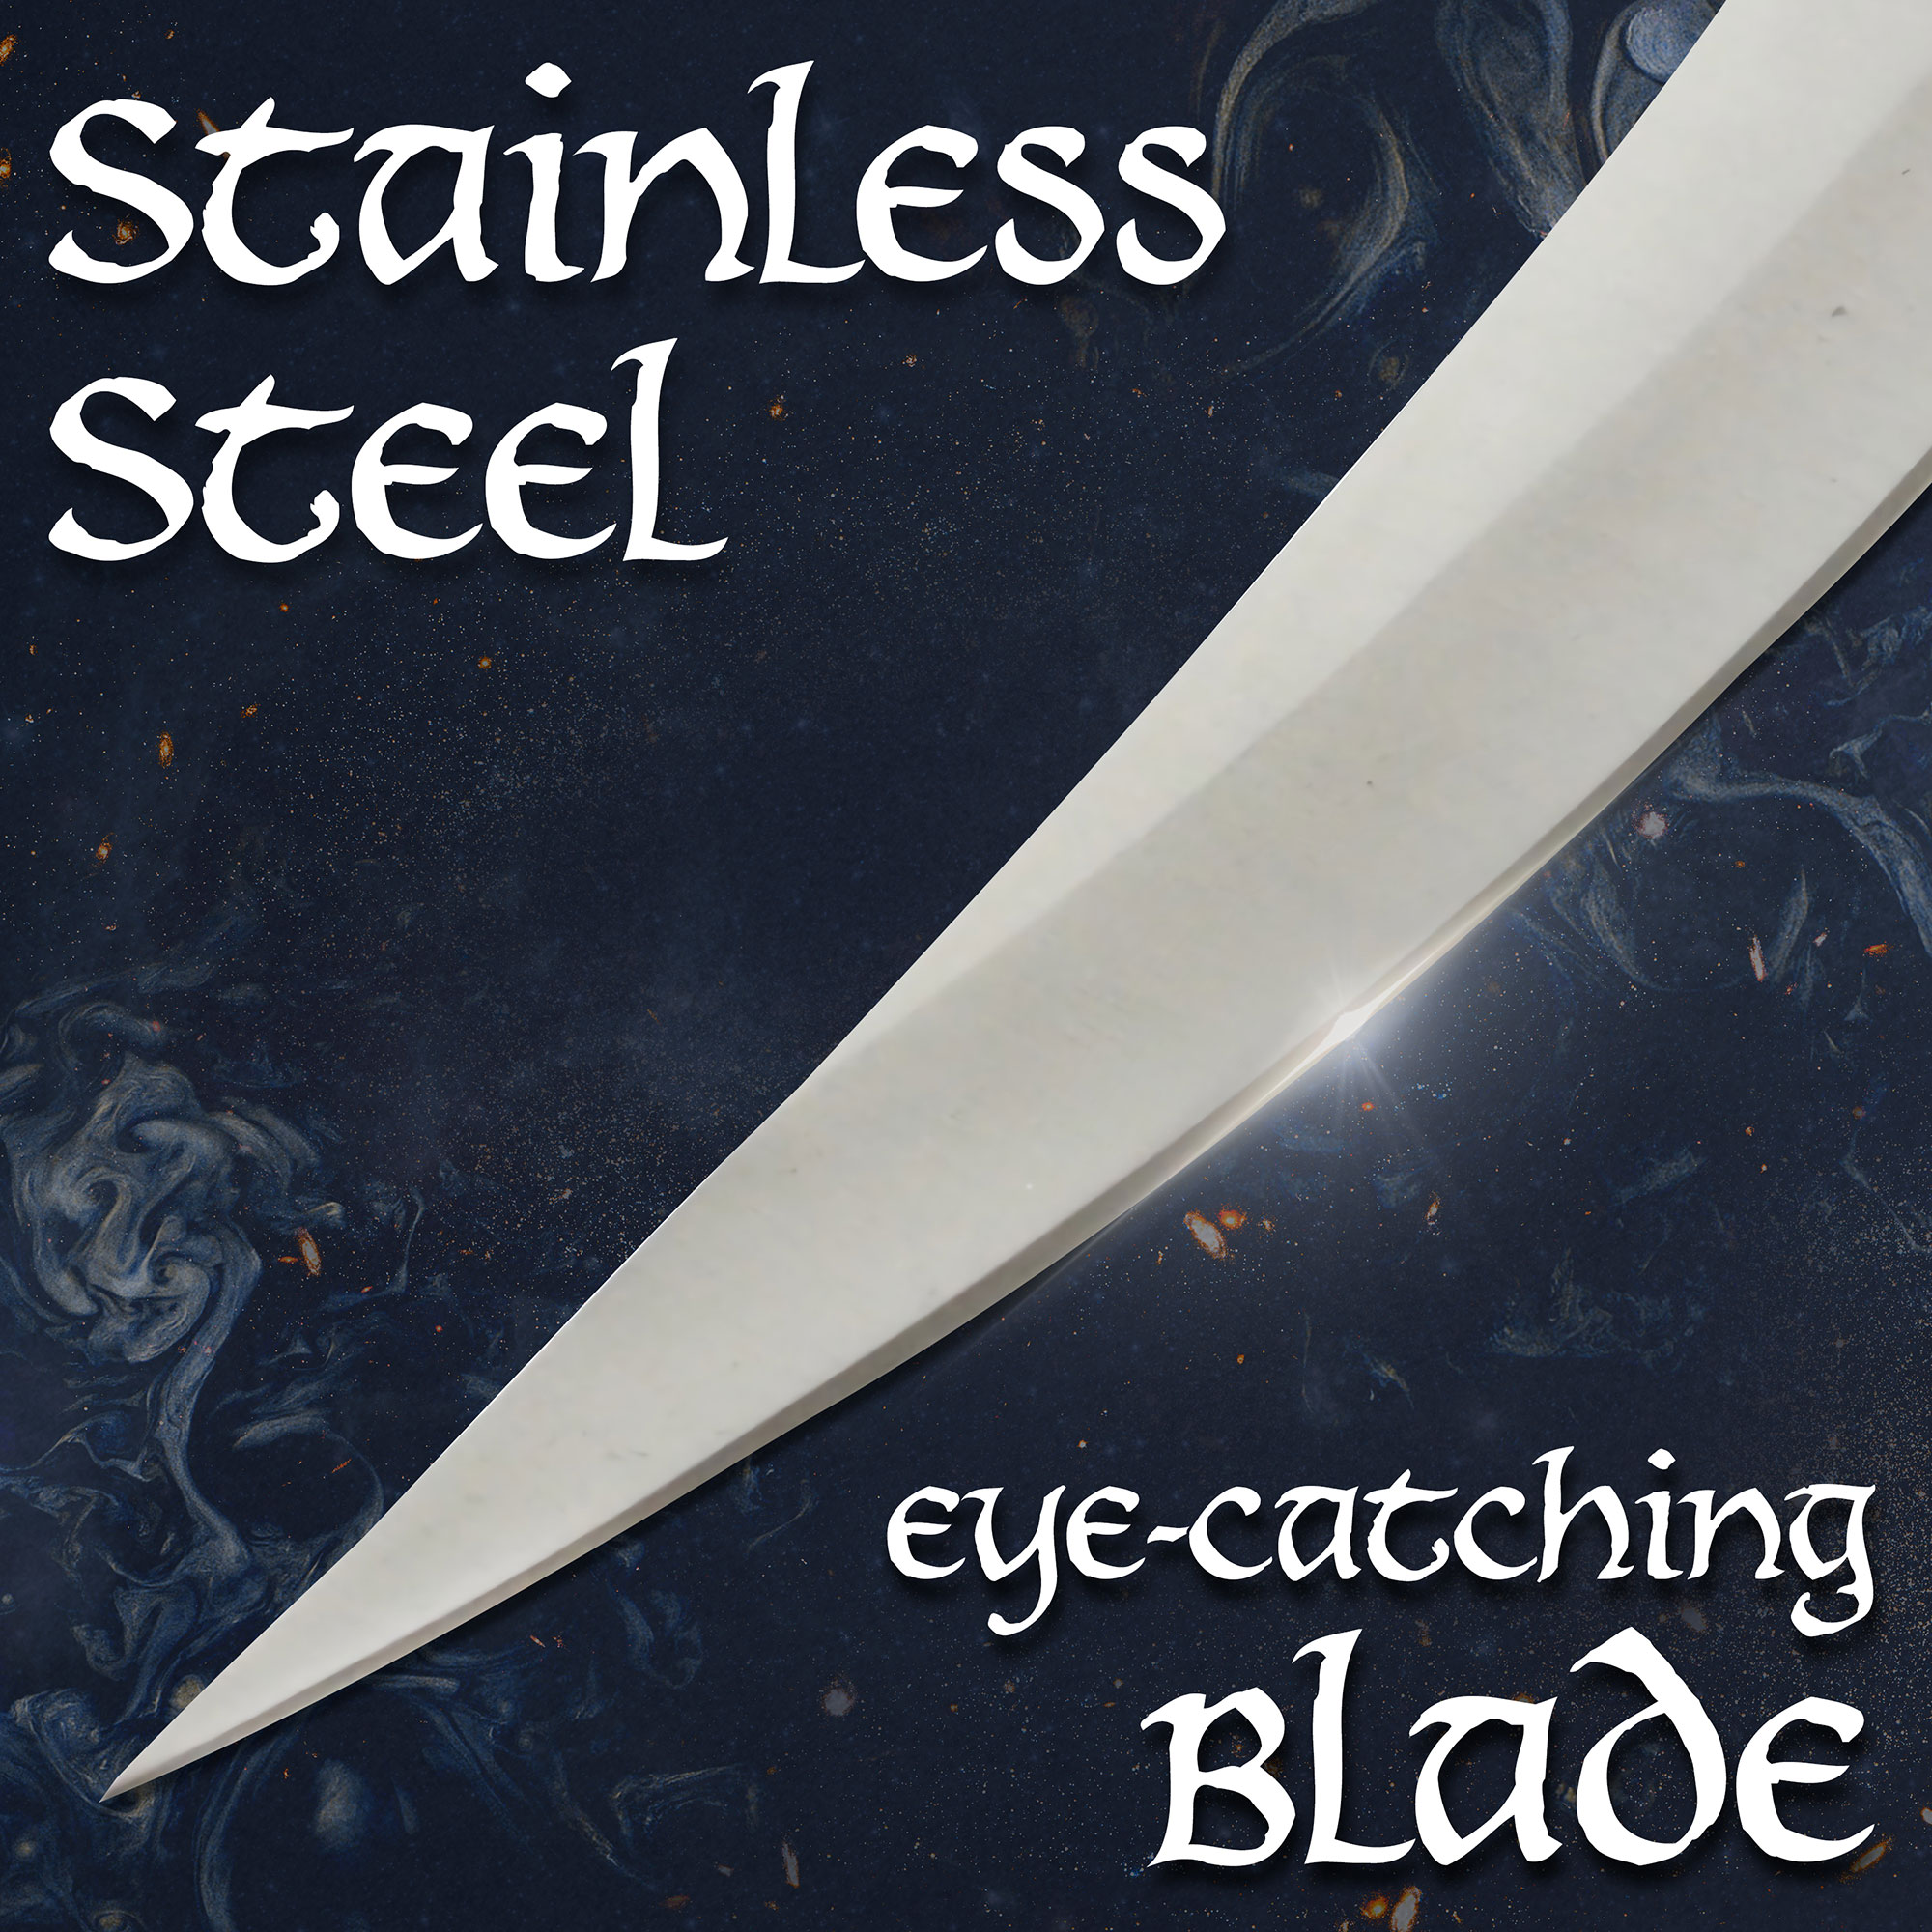 The Chronicles of Riddick - Silberne Sabre Claws